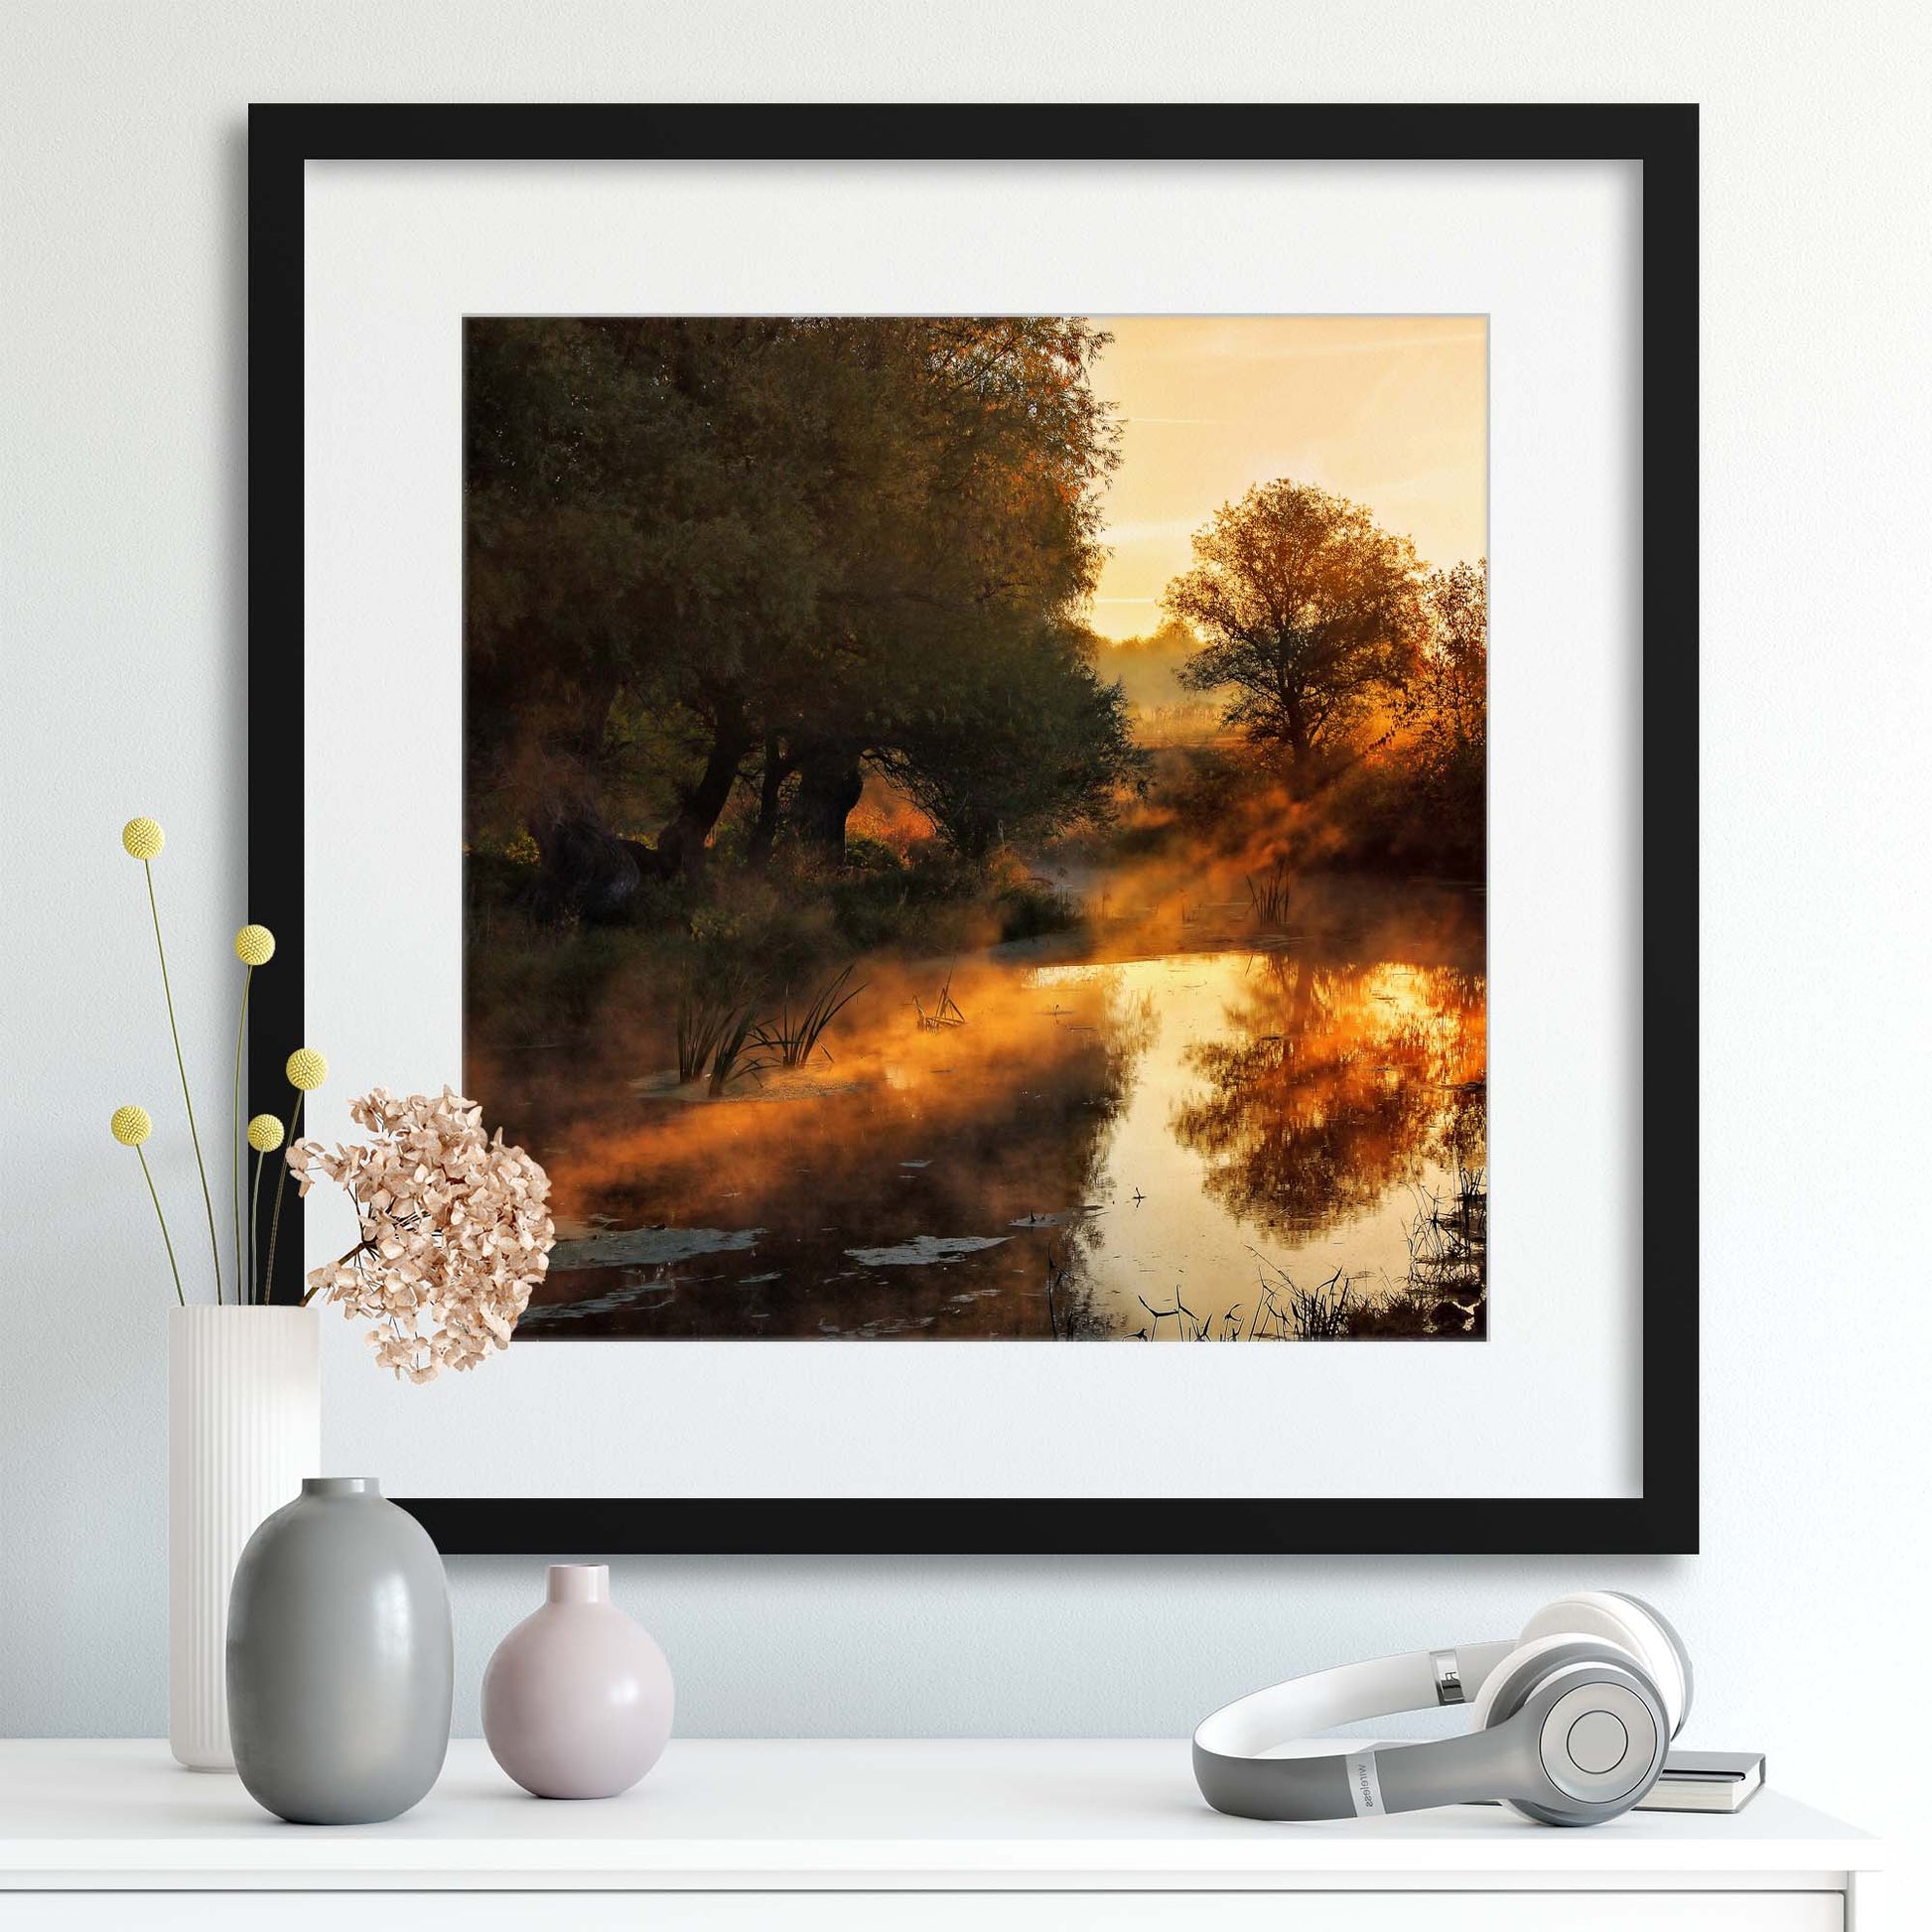 When nature paints with light I by Leicher Oliver Framed Print - USTAD HOME